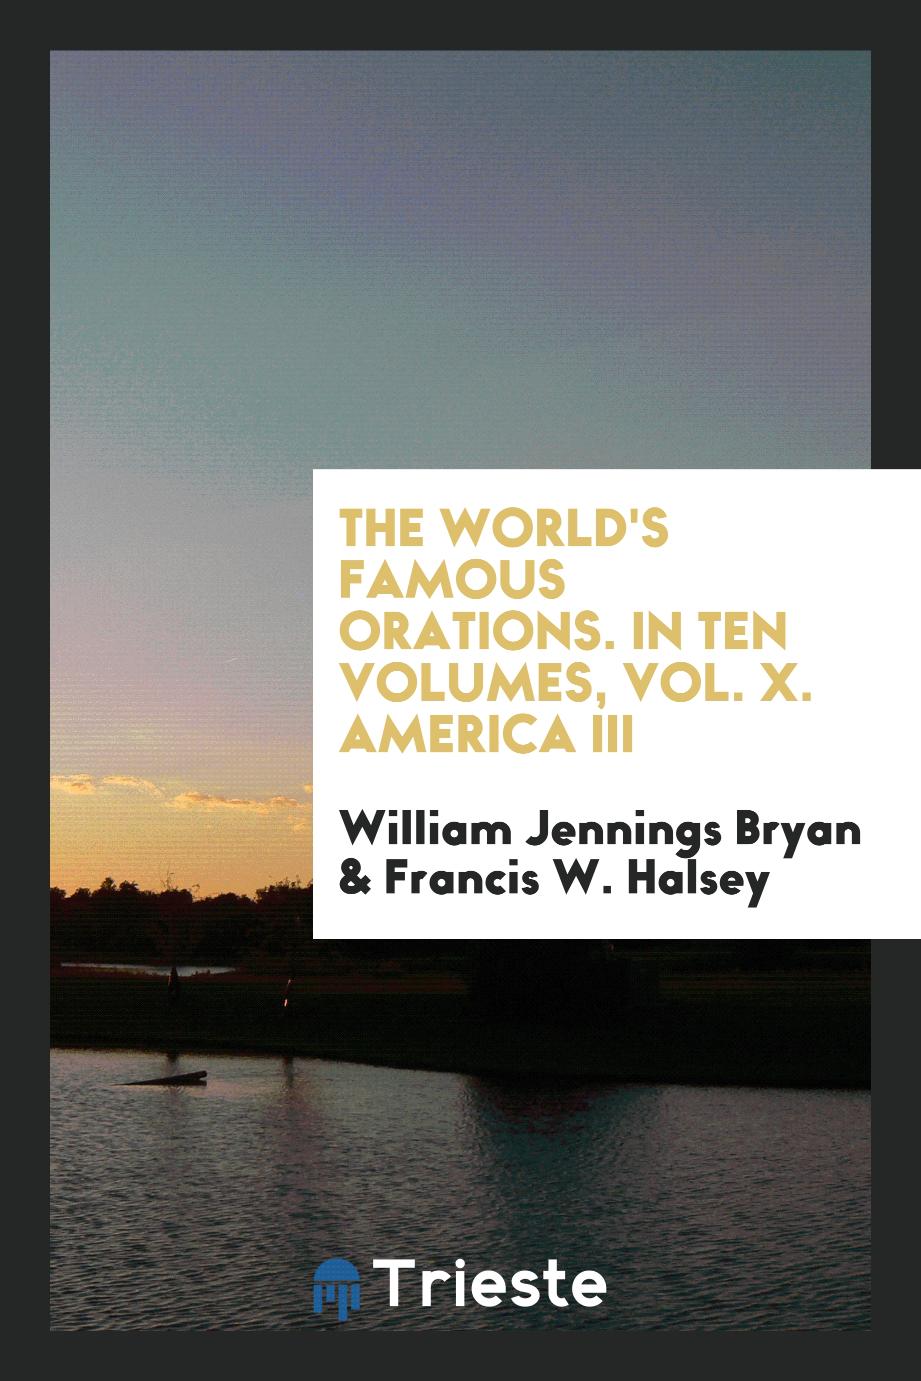 The World's Famous Orations. In Ten Volumes, Vol. X. America III